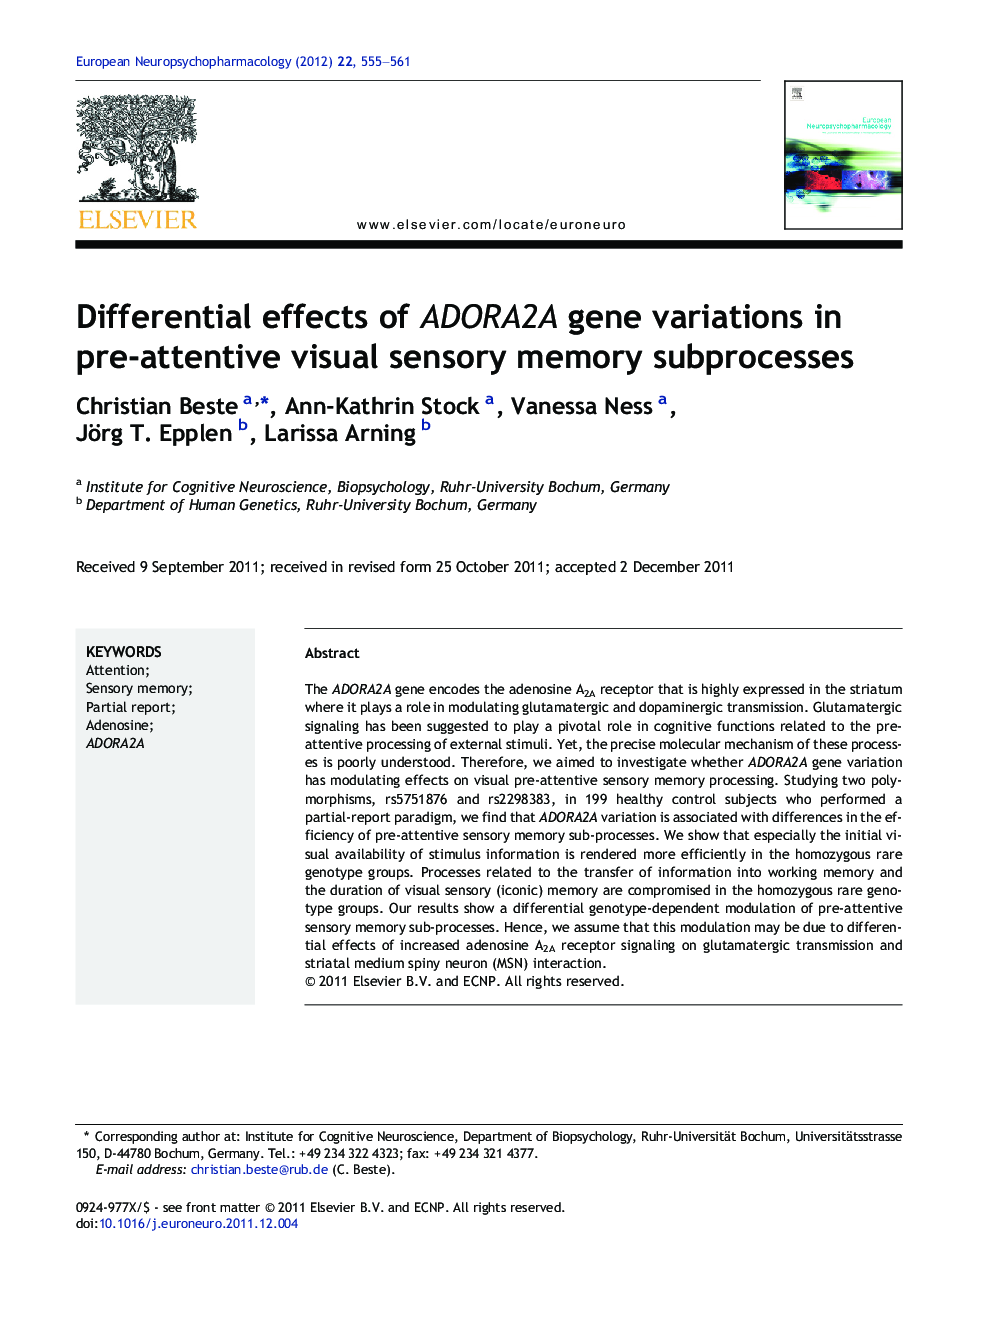 Differential effects of ADORA2A gene variations in pre-attentive visual sensory memory subprocesses